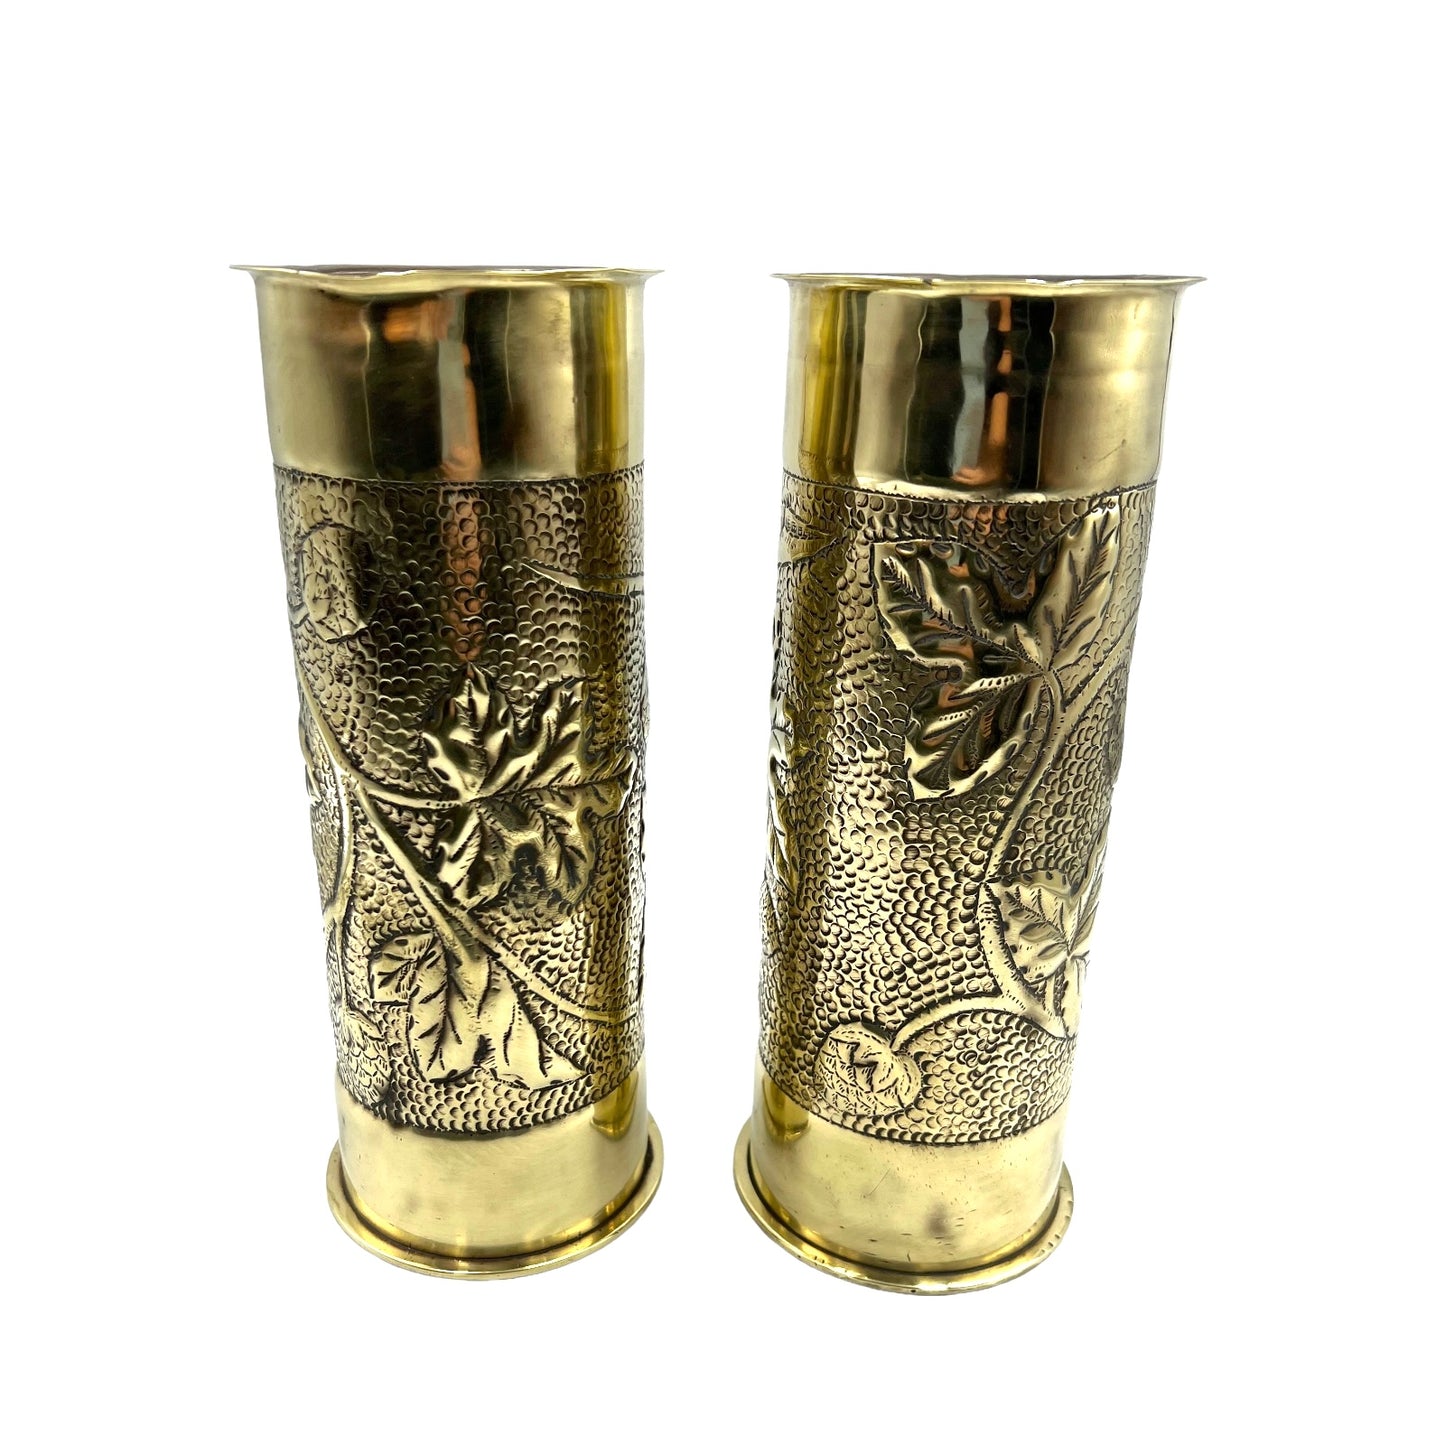 Pair of German trench art shell case vases